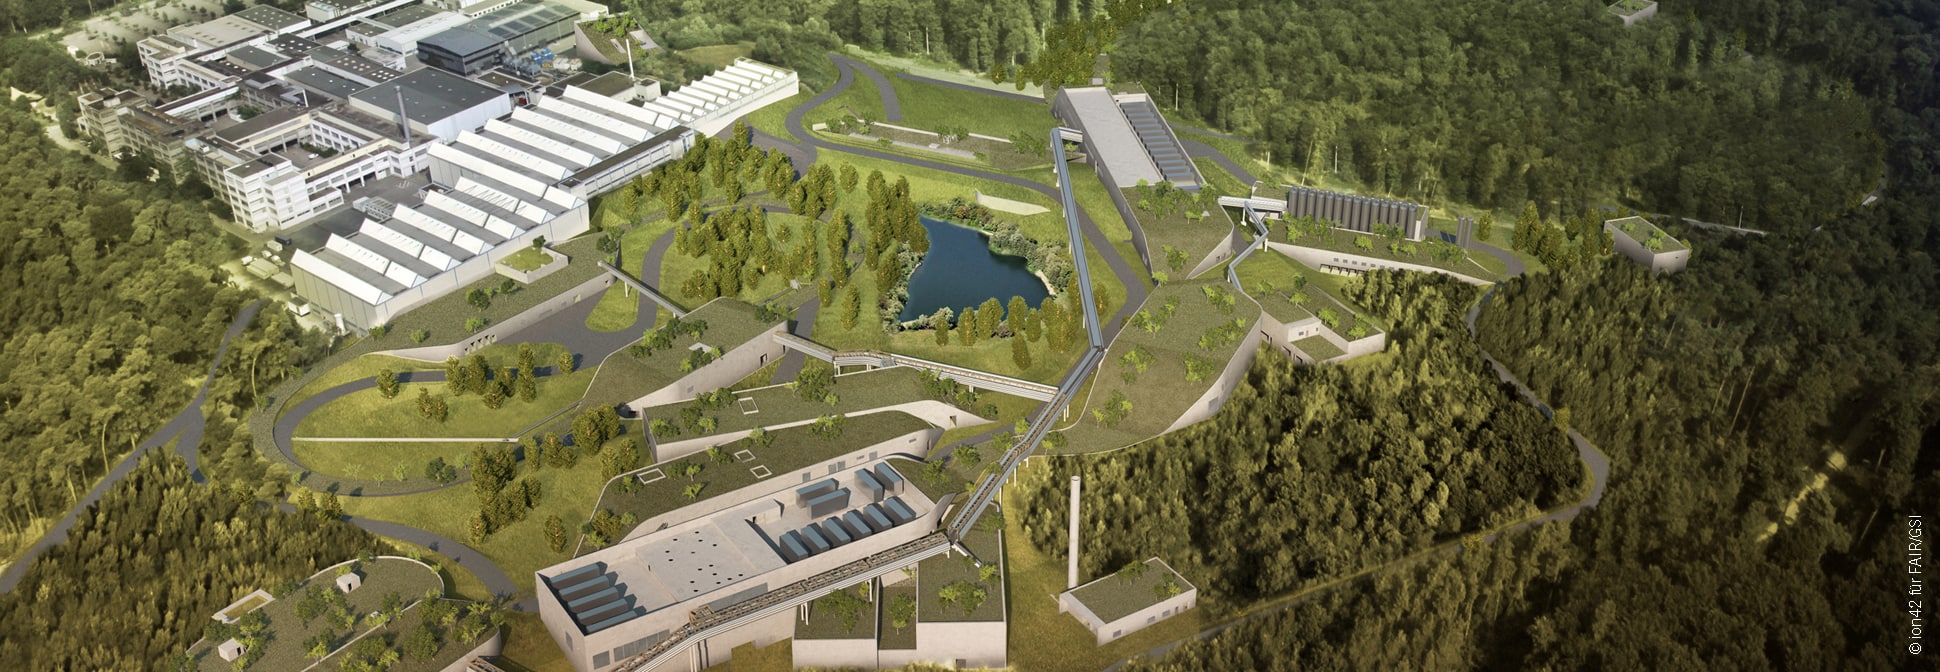 FAIR – Facility for Antiproton and Ion Research, Darmstadt